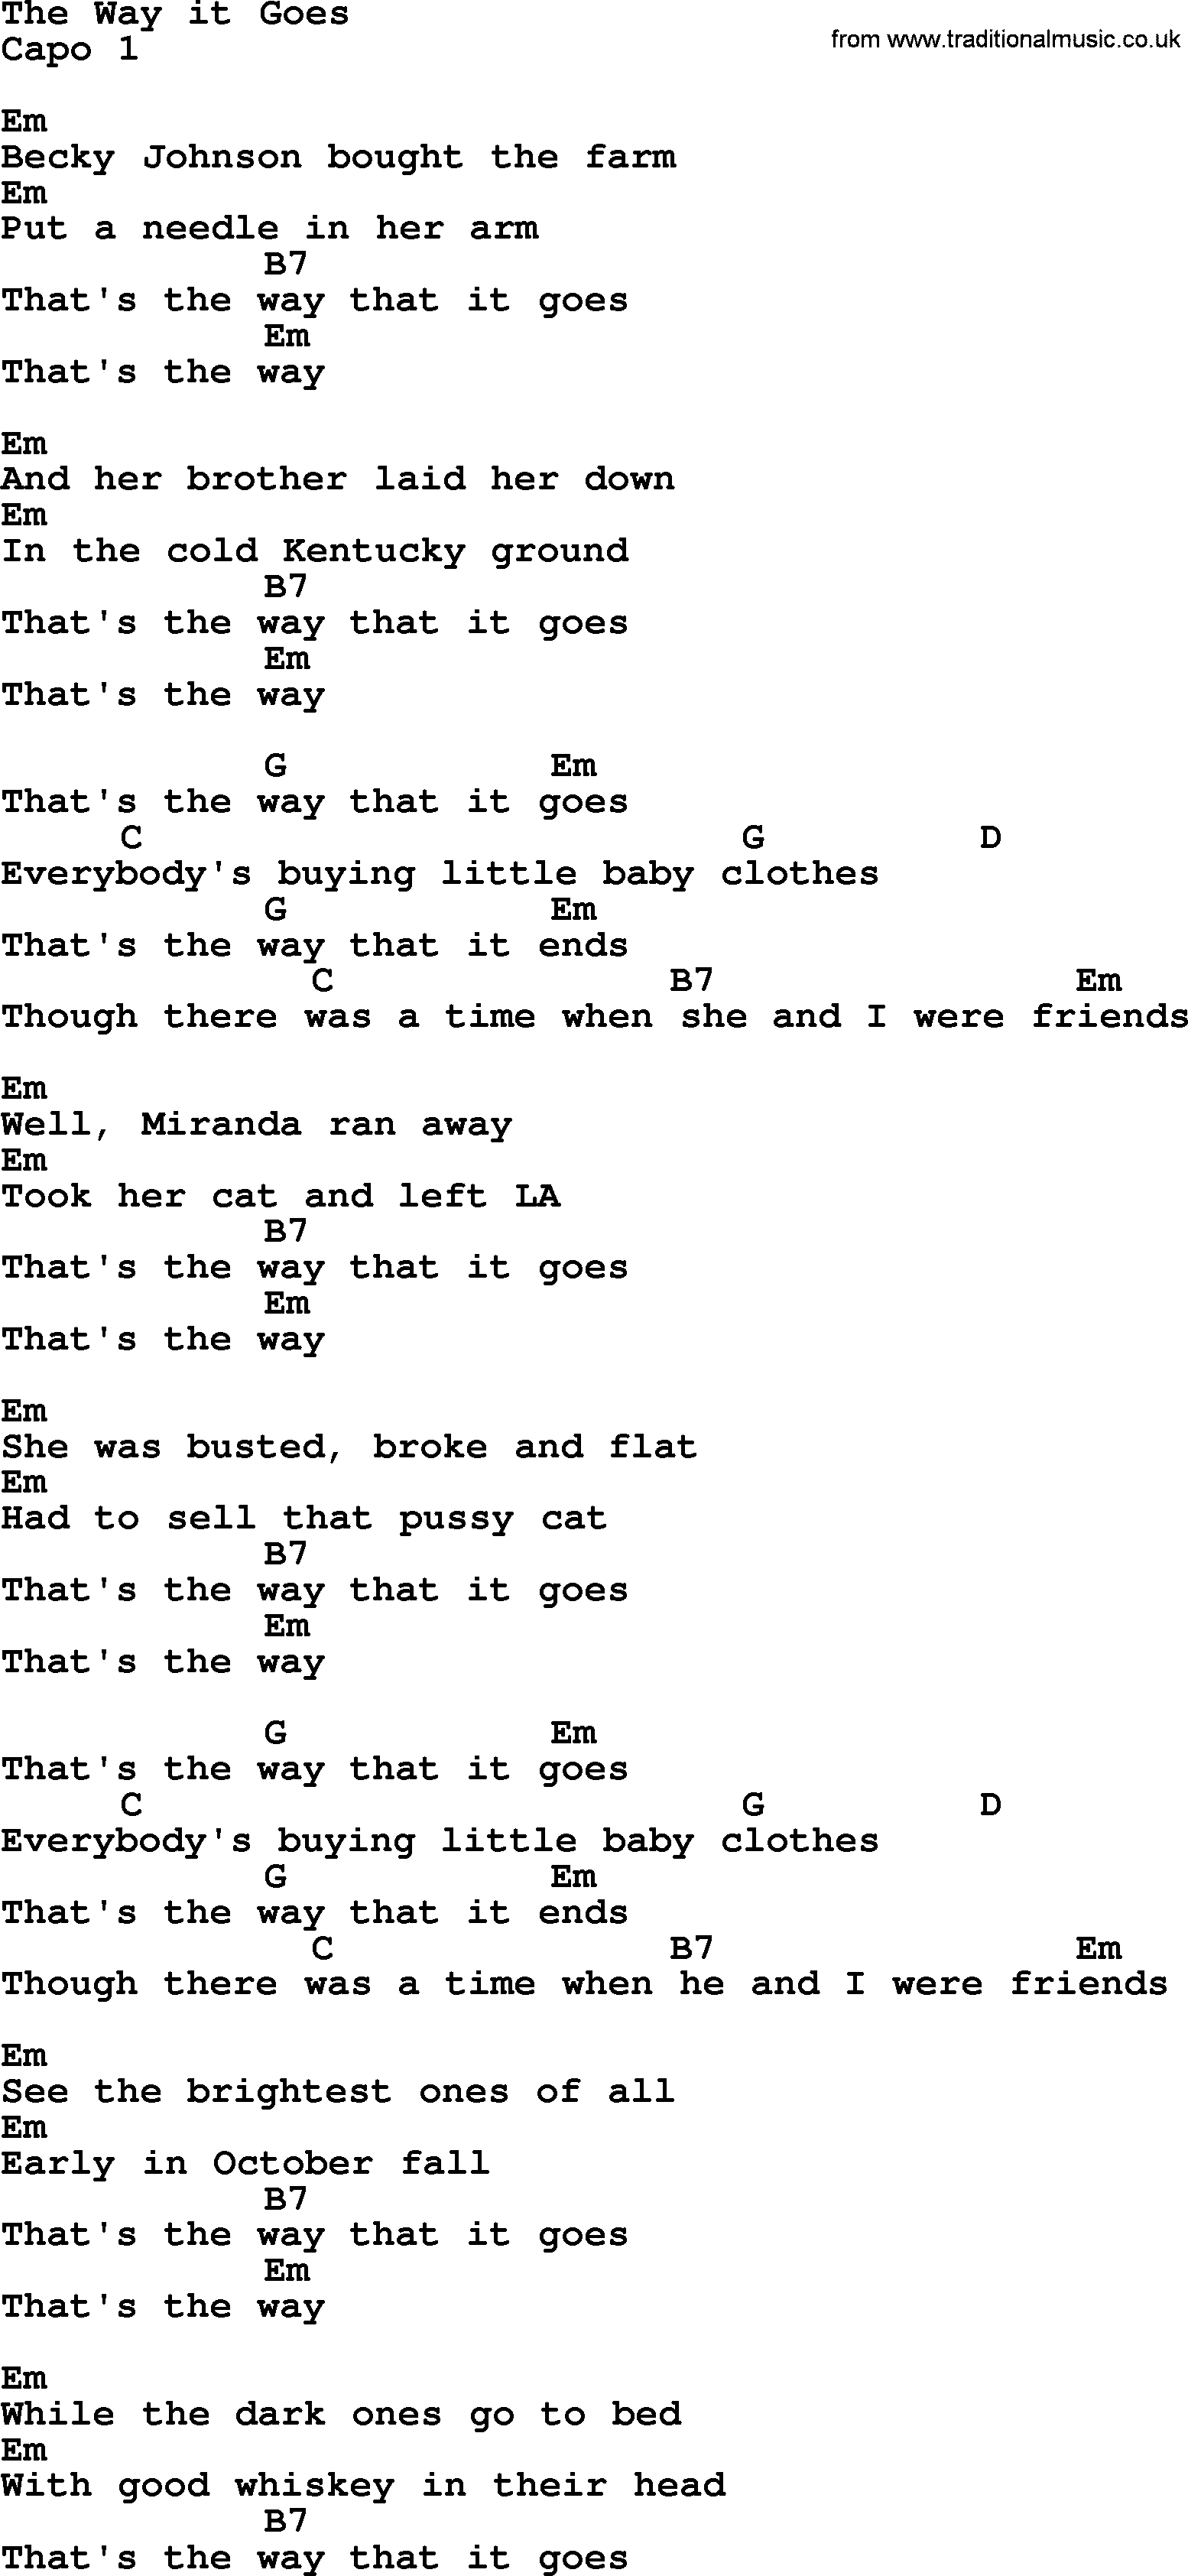 Bluegrass song: The Way It Goes, lyrics and chords